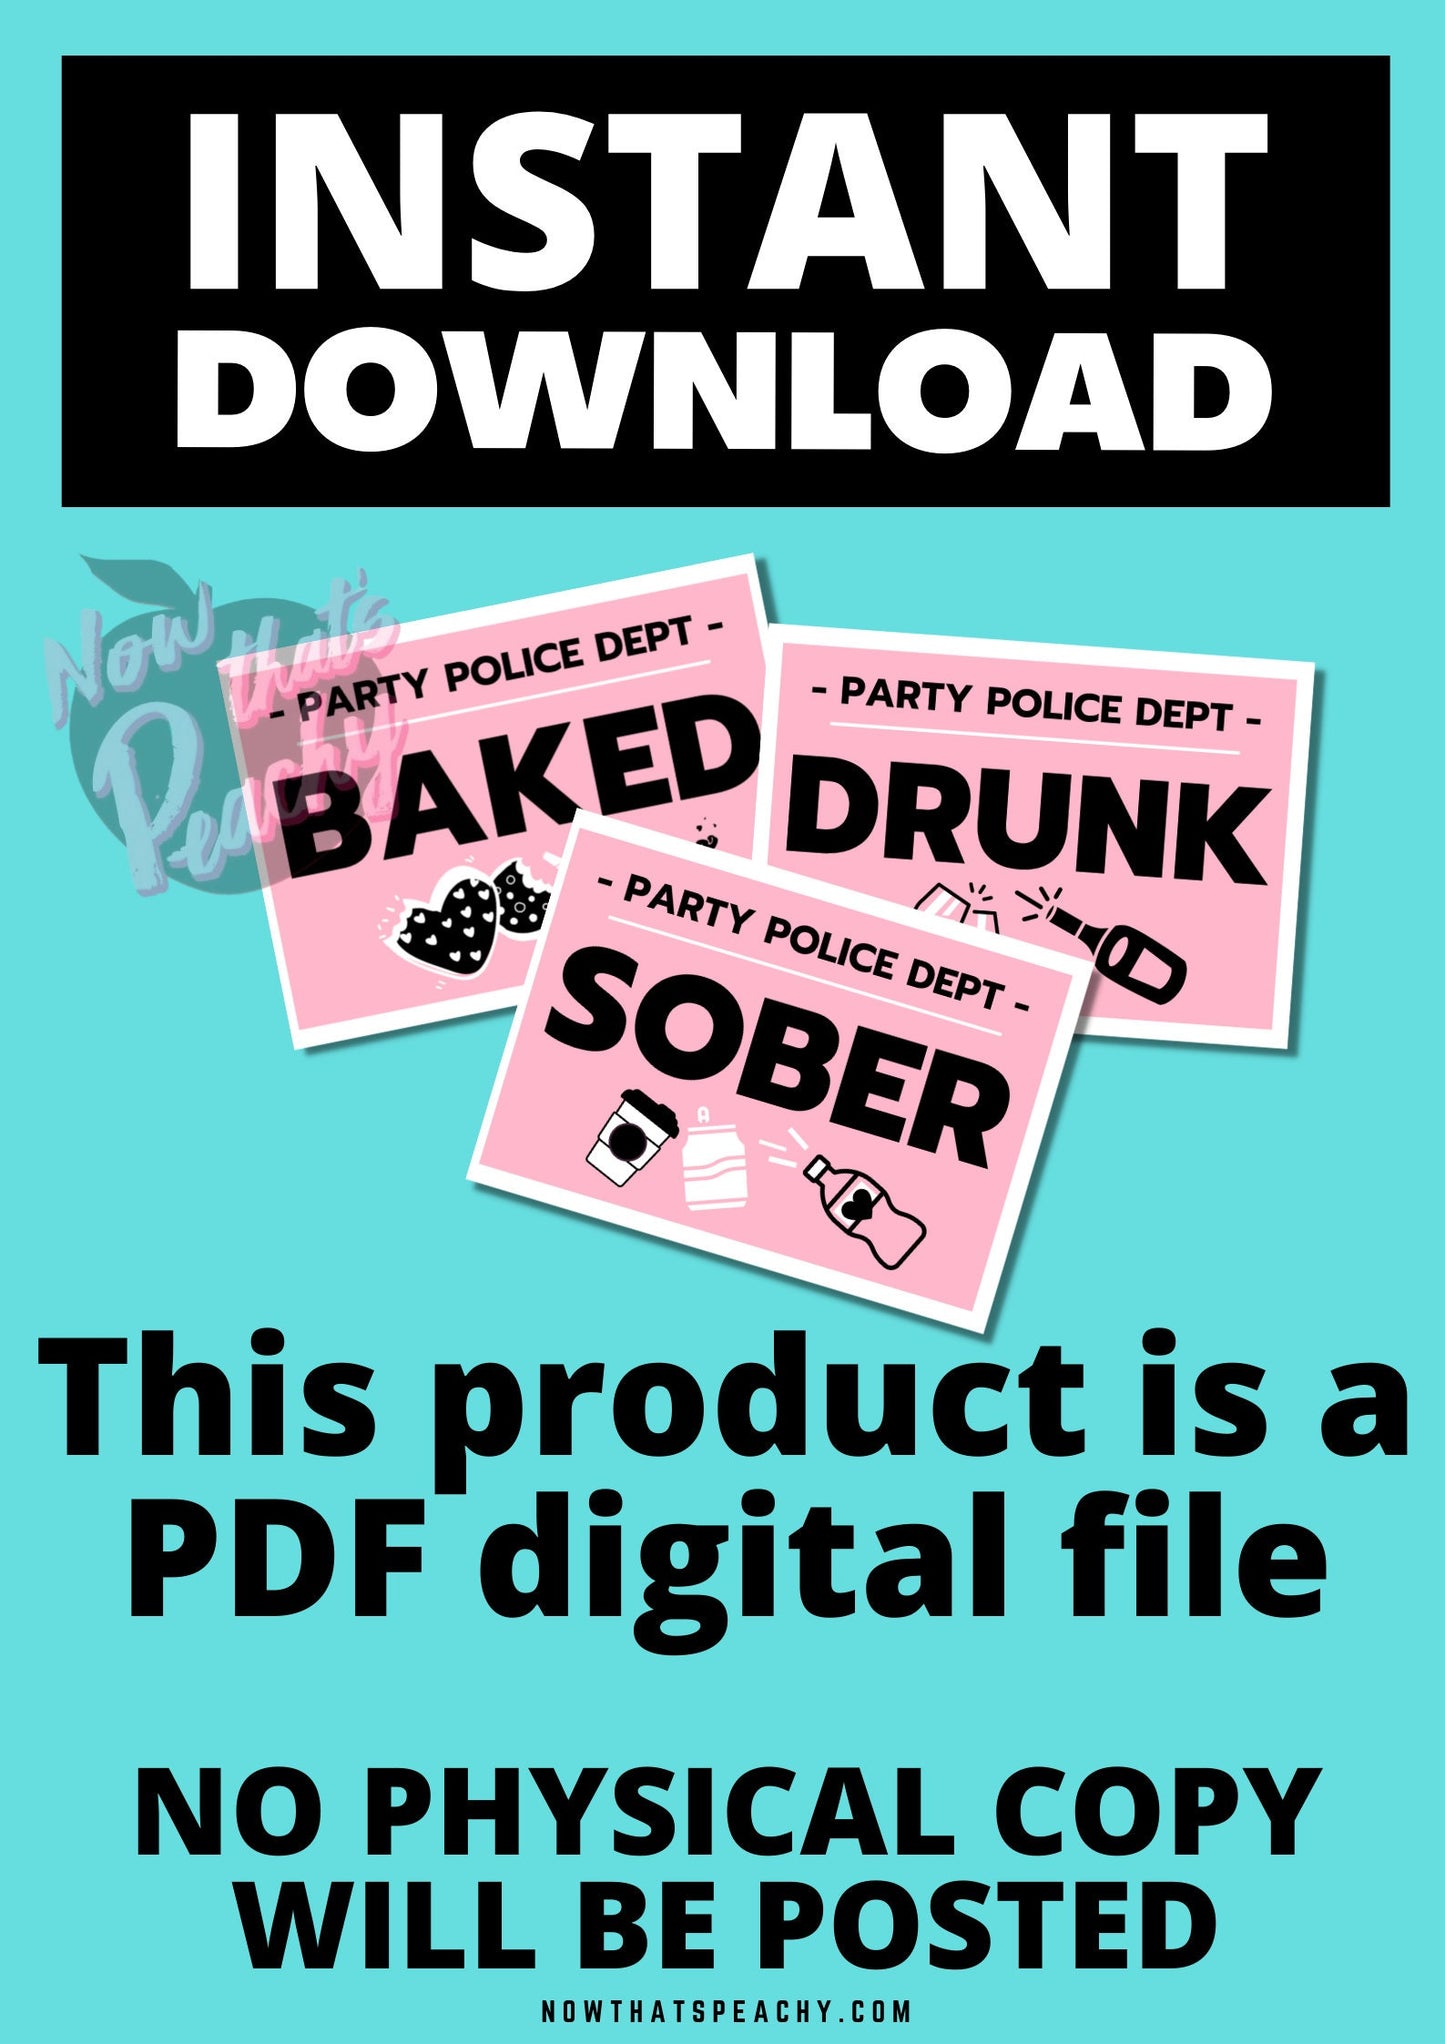 Sober Drunk Baked MUGSHOT Photo booth PRINTABLES police lineup mugshot 18+ adult party sign funny Props HENS night Bachelorette photobooth